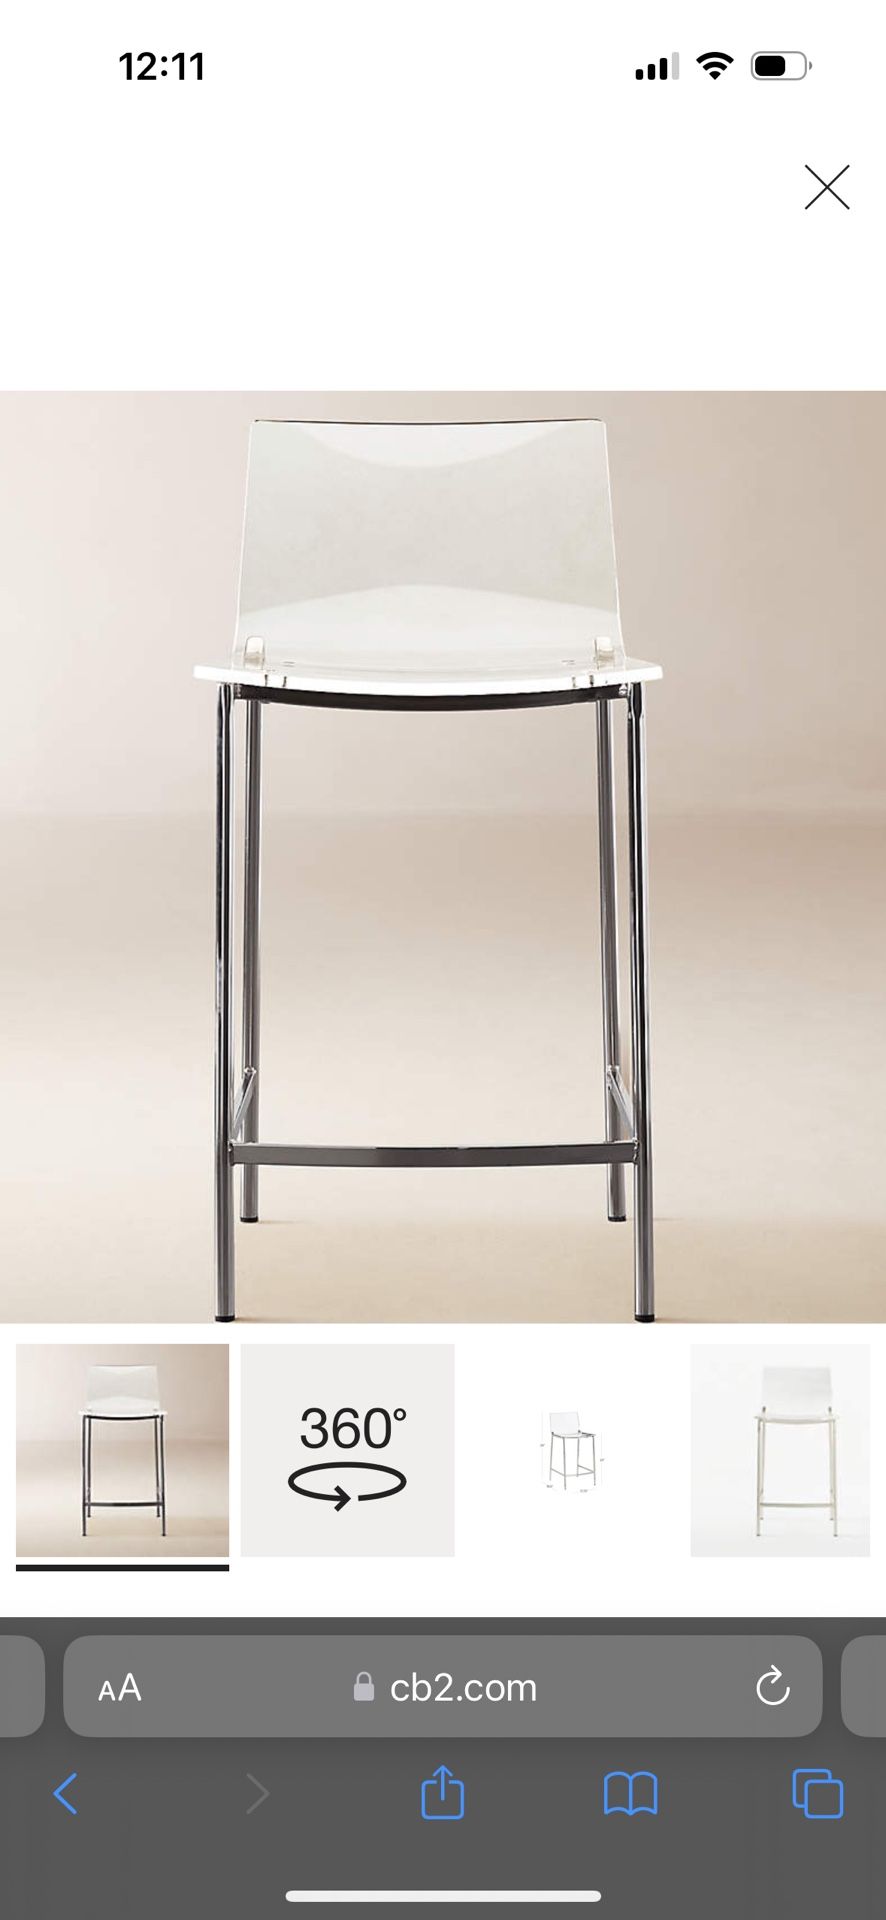 4 Crate And Barrel CB2 Counter Acrylic Stool 